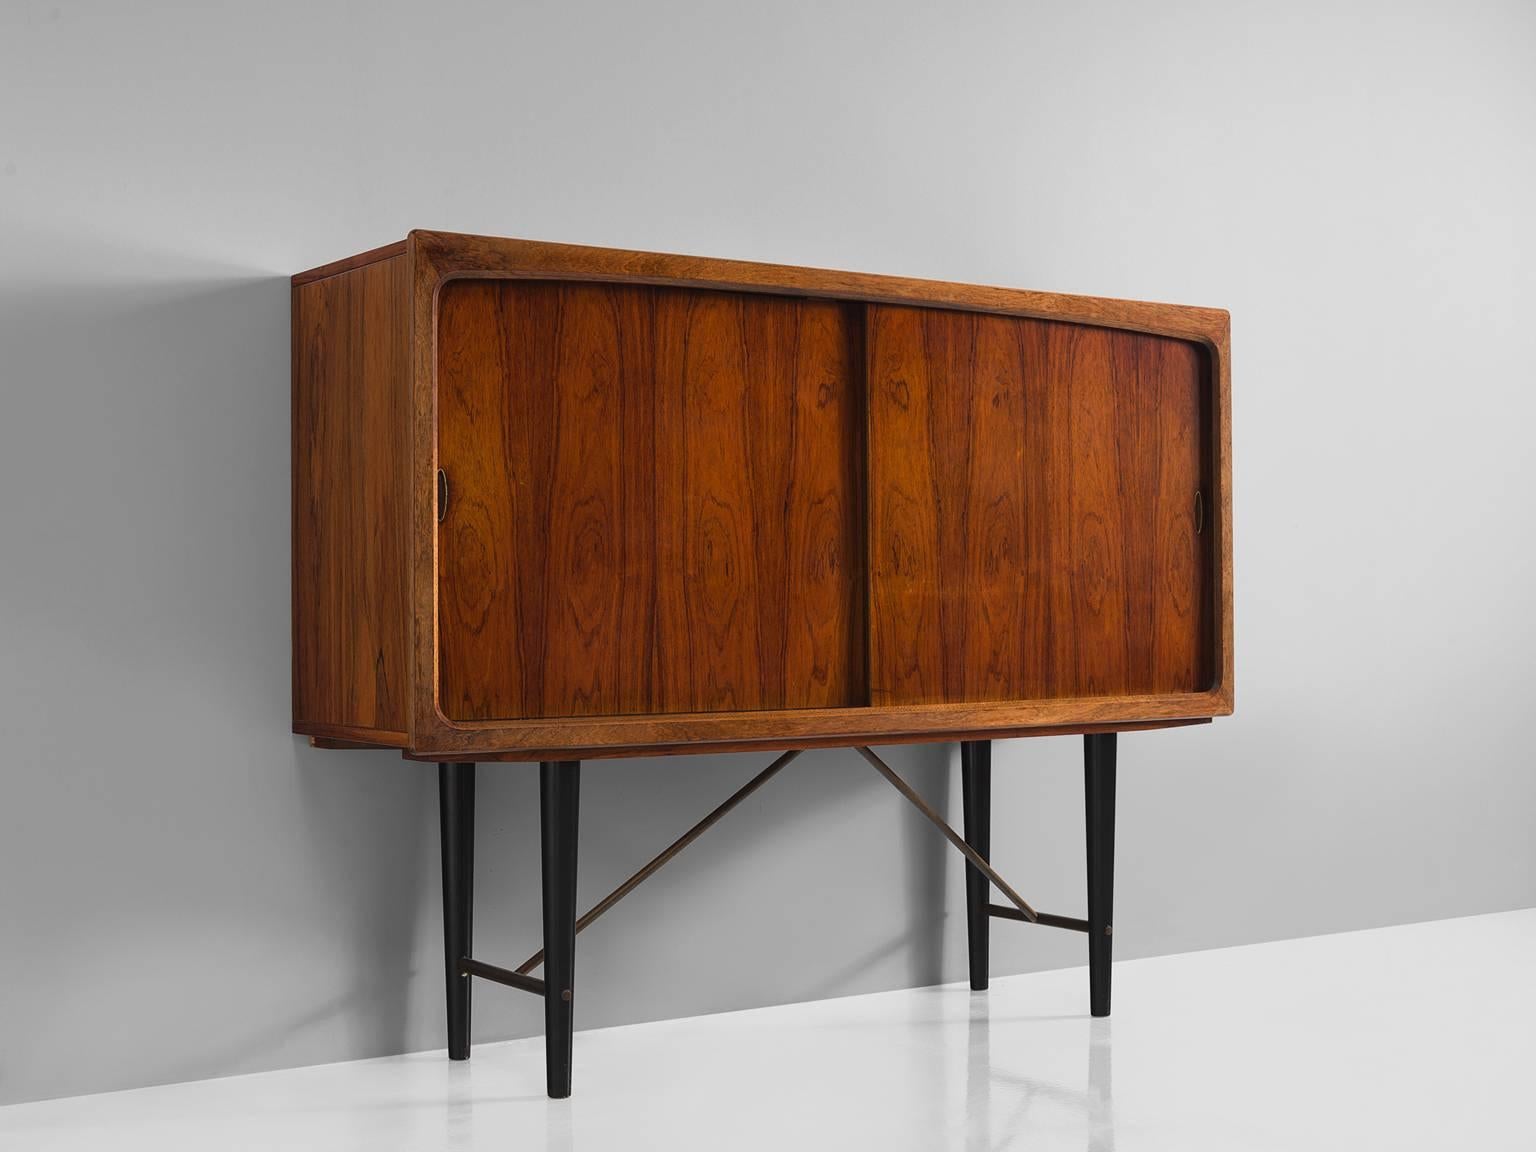 Cabinet, rosewood, black metal, Denmark, 1950s.

This cabinet is executed in rosewood and is typical for midcentury Scandinavian design. The cabinet features base with four black wooden tapered legs that are connected via horizontal rods and brass